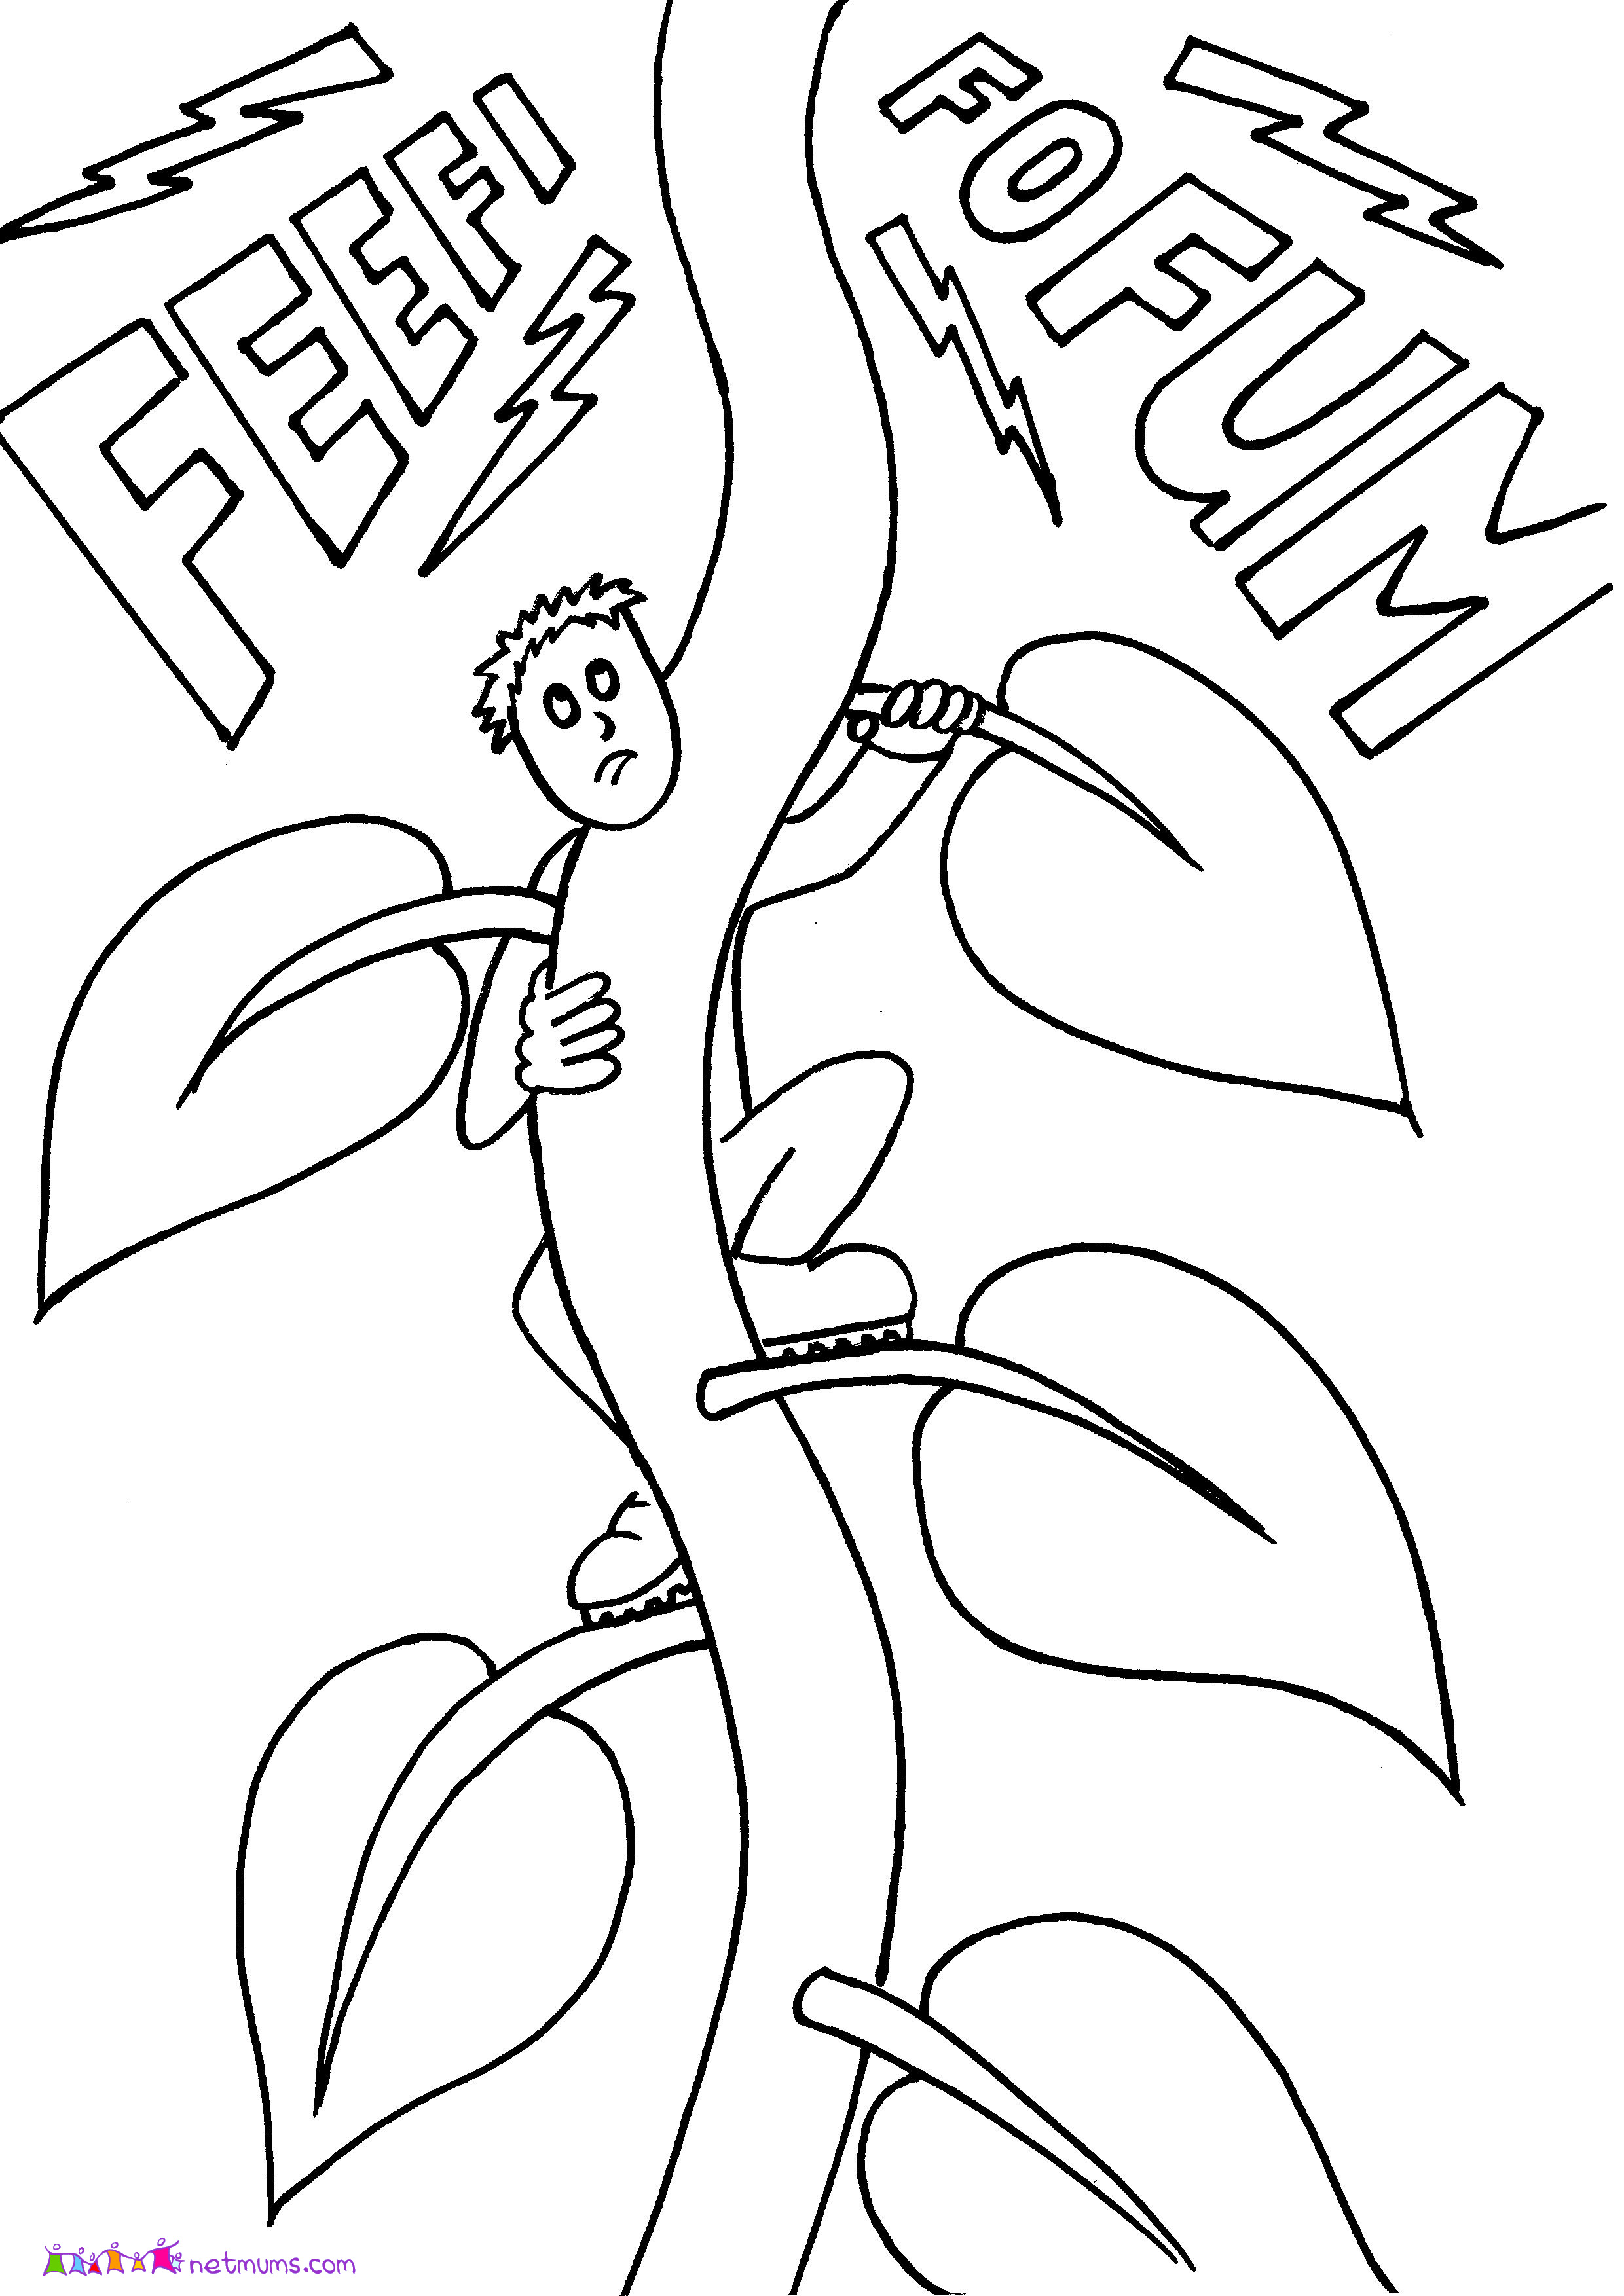 Epic Jack And The Beanstalk Coloring Pages 51 On Coloring Site ...